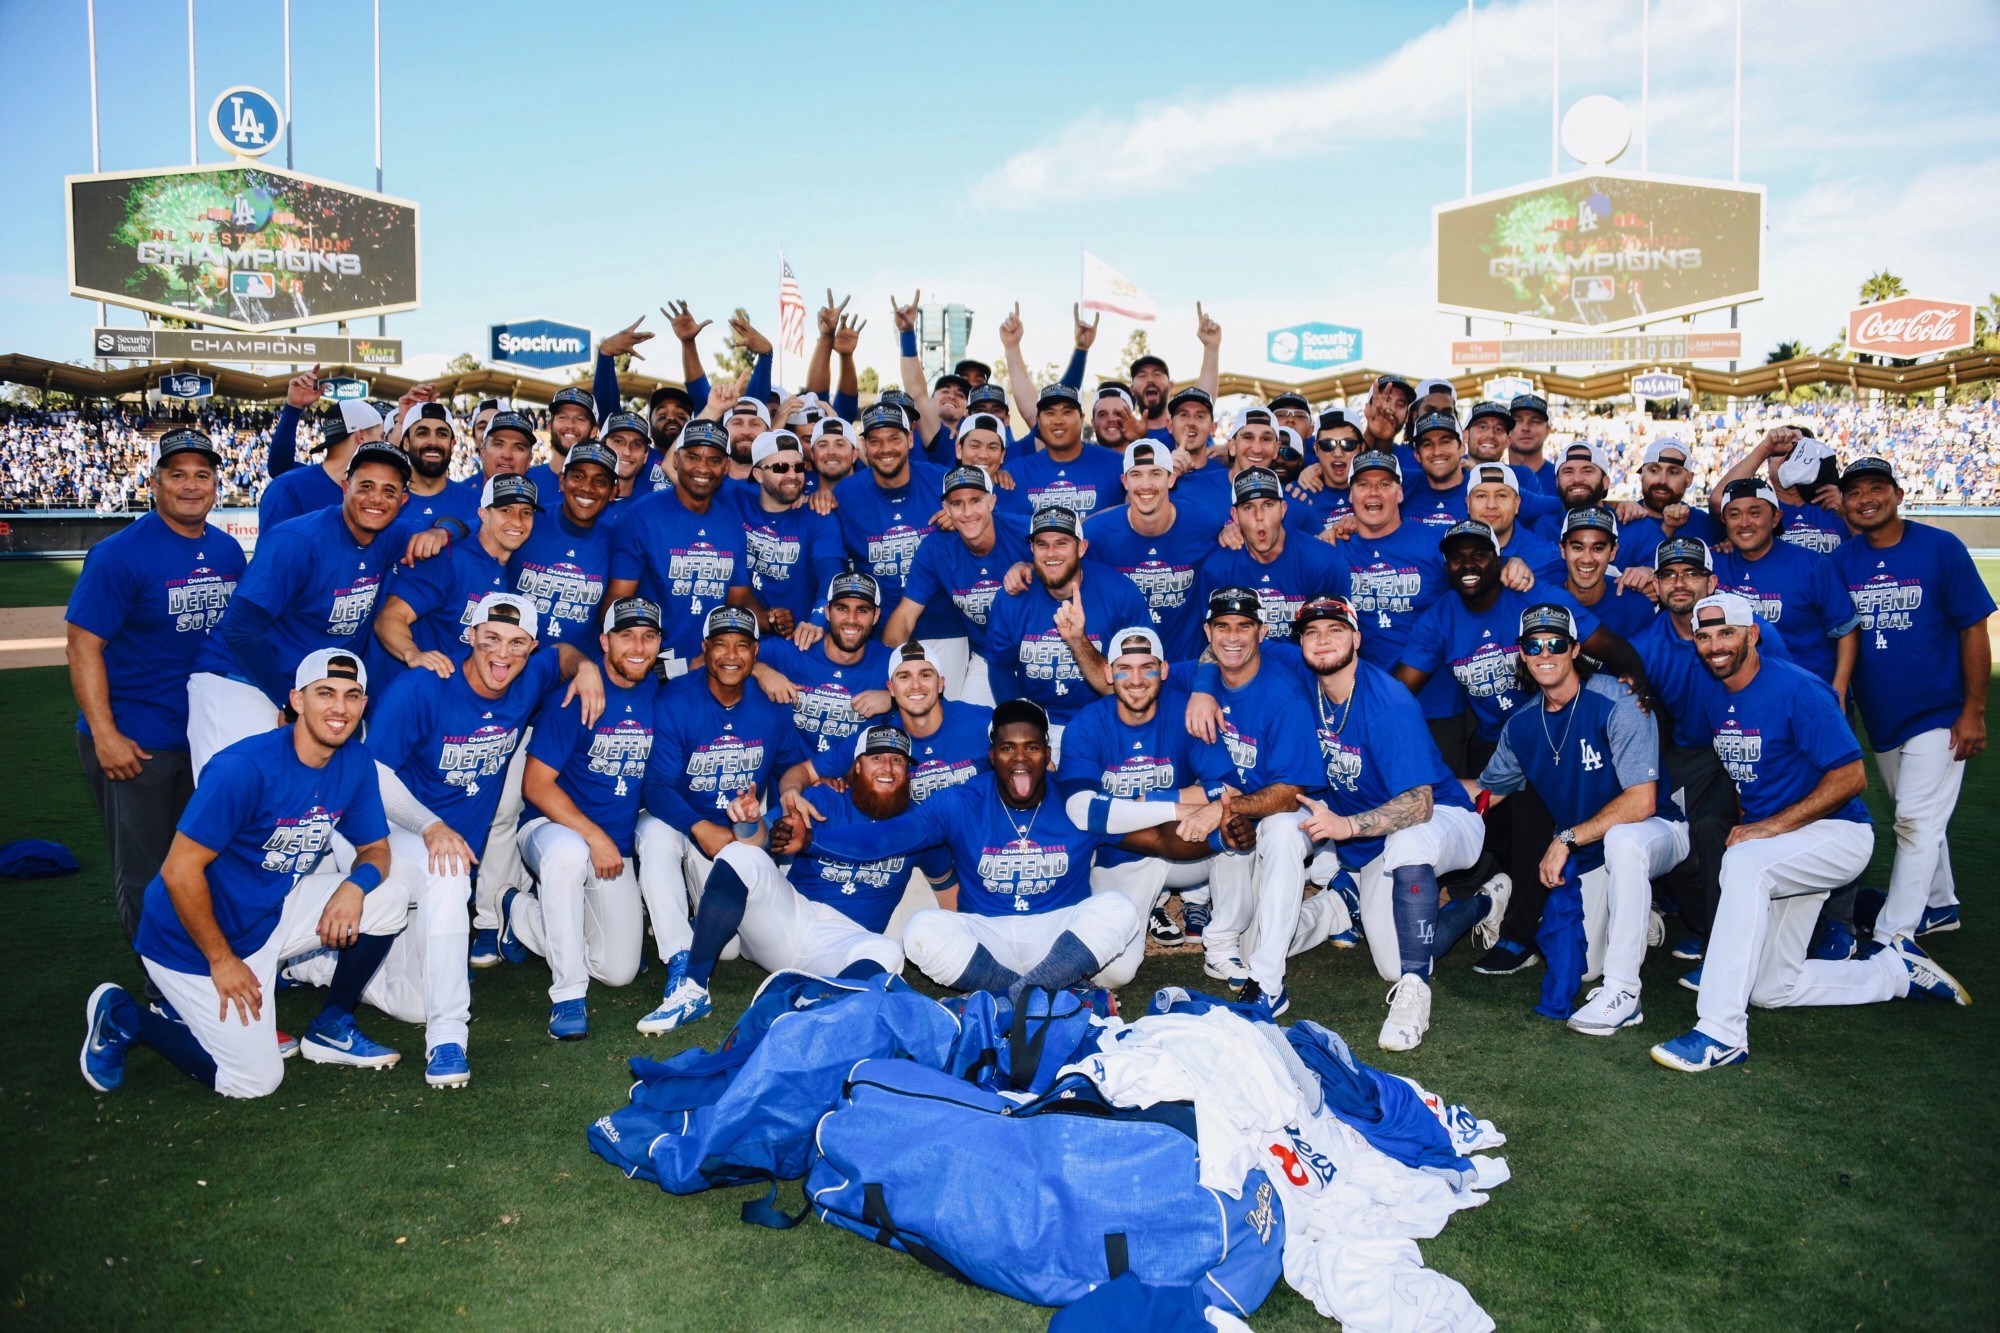 A Dodger Thoughts review of the Dodgers’ playoff journey Dodger Thoughts